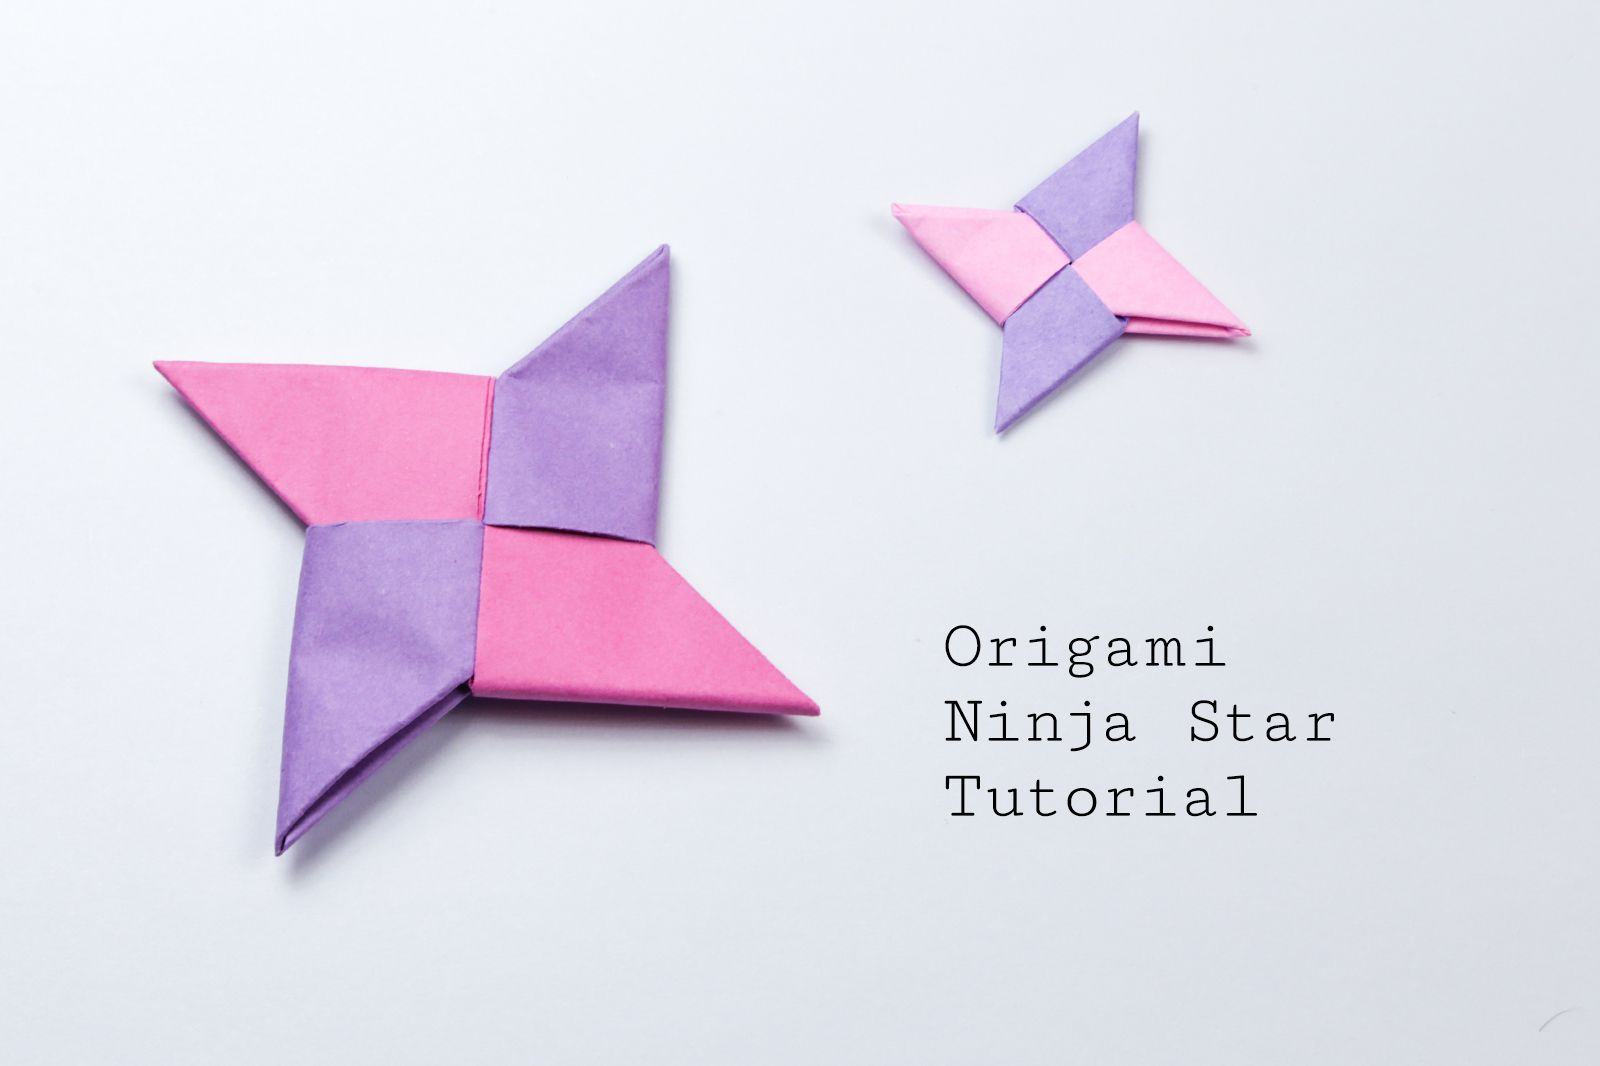 How To Make 3D Origami Pieces Origami Ninja Star Tutorial